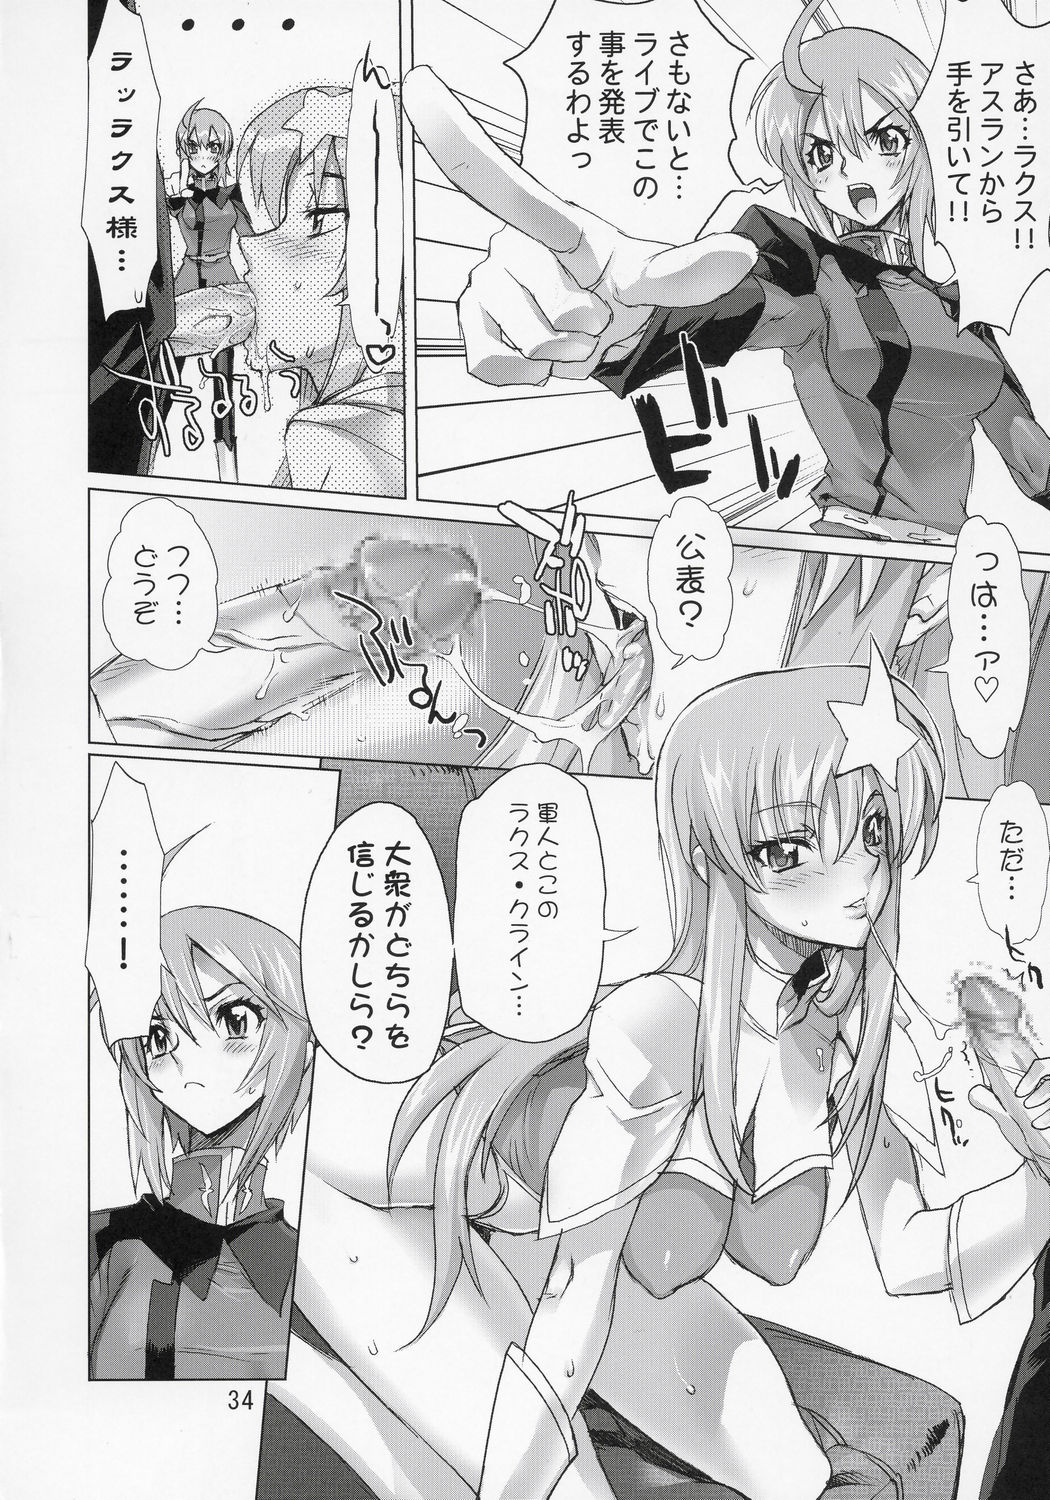 (C69) [Digital Accel Works] Inazuma Warrior 2 (Various) page 33 full